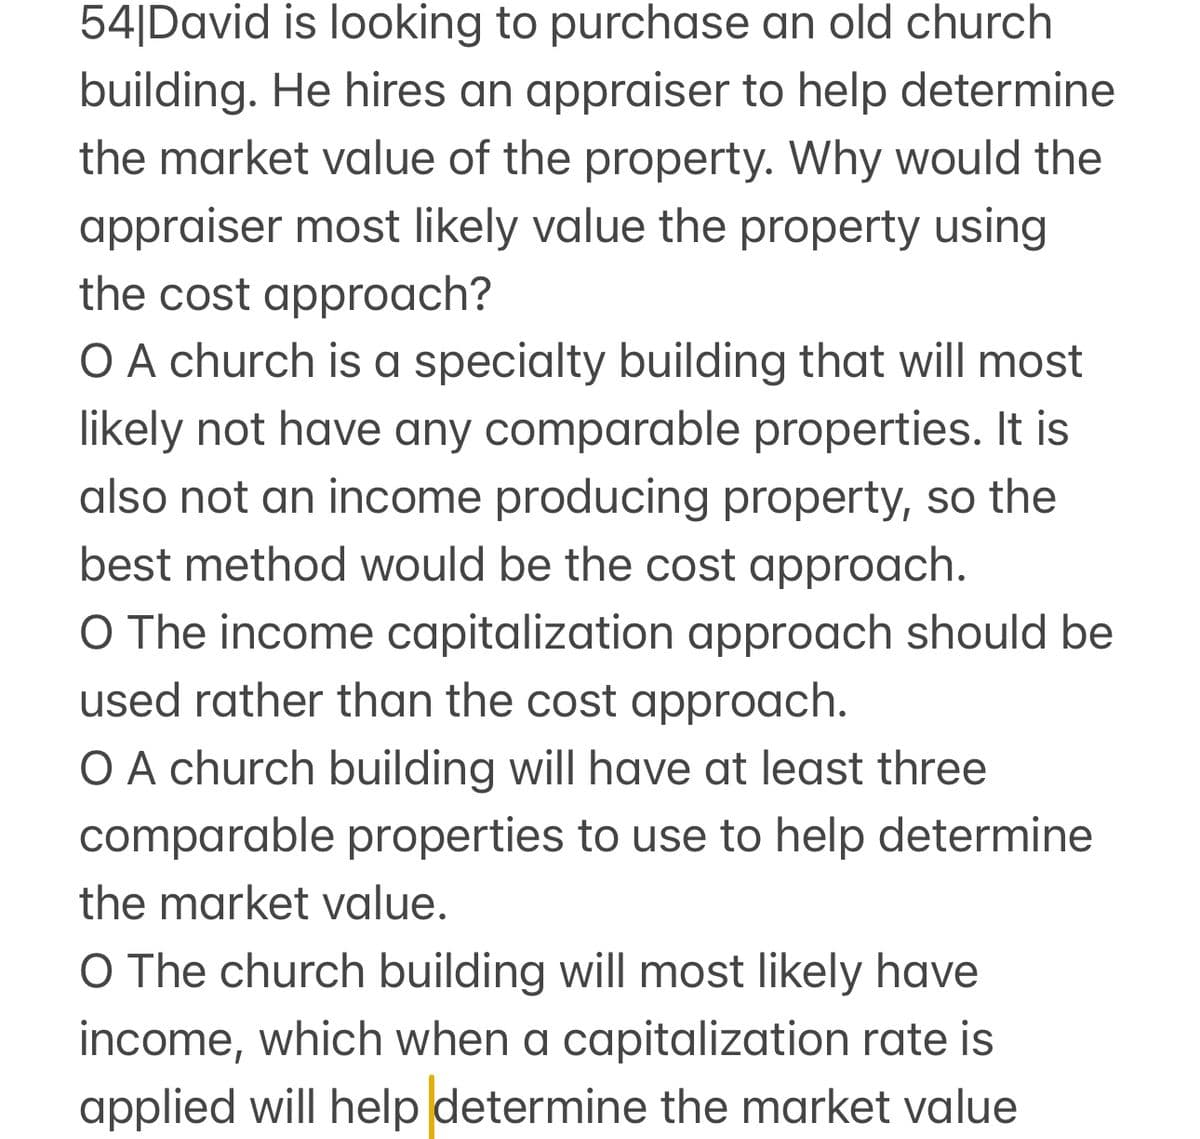 54|David is looking to purchase an old church
building. He hires an appraiser to help determine
the market value of the property. Why would the
appraiser most likely value the property using
the cost approach?
O A church is a specialty building that will most
likely not have any comparable properties. It is
also not an income producing property, so the
best method would be the cost approach.
O The income capitalization approach should be
used rather than the cost approach.
O A church building will have at least three
comparable properties to use to help determine
the market value.
O The church building will most likely have
income, which when a capitalization rate is
applied will help determine the market value